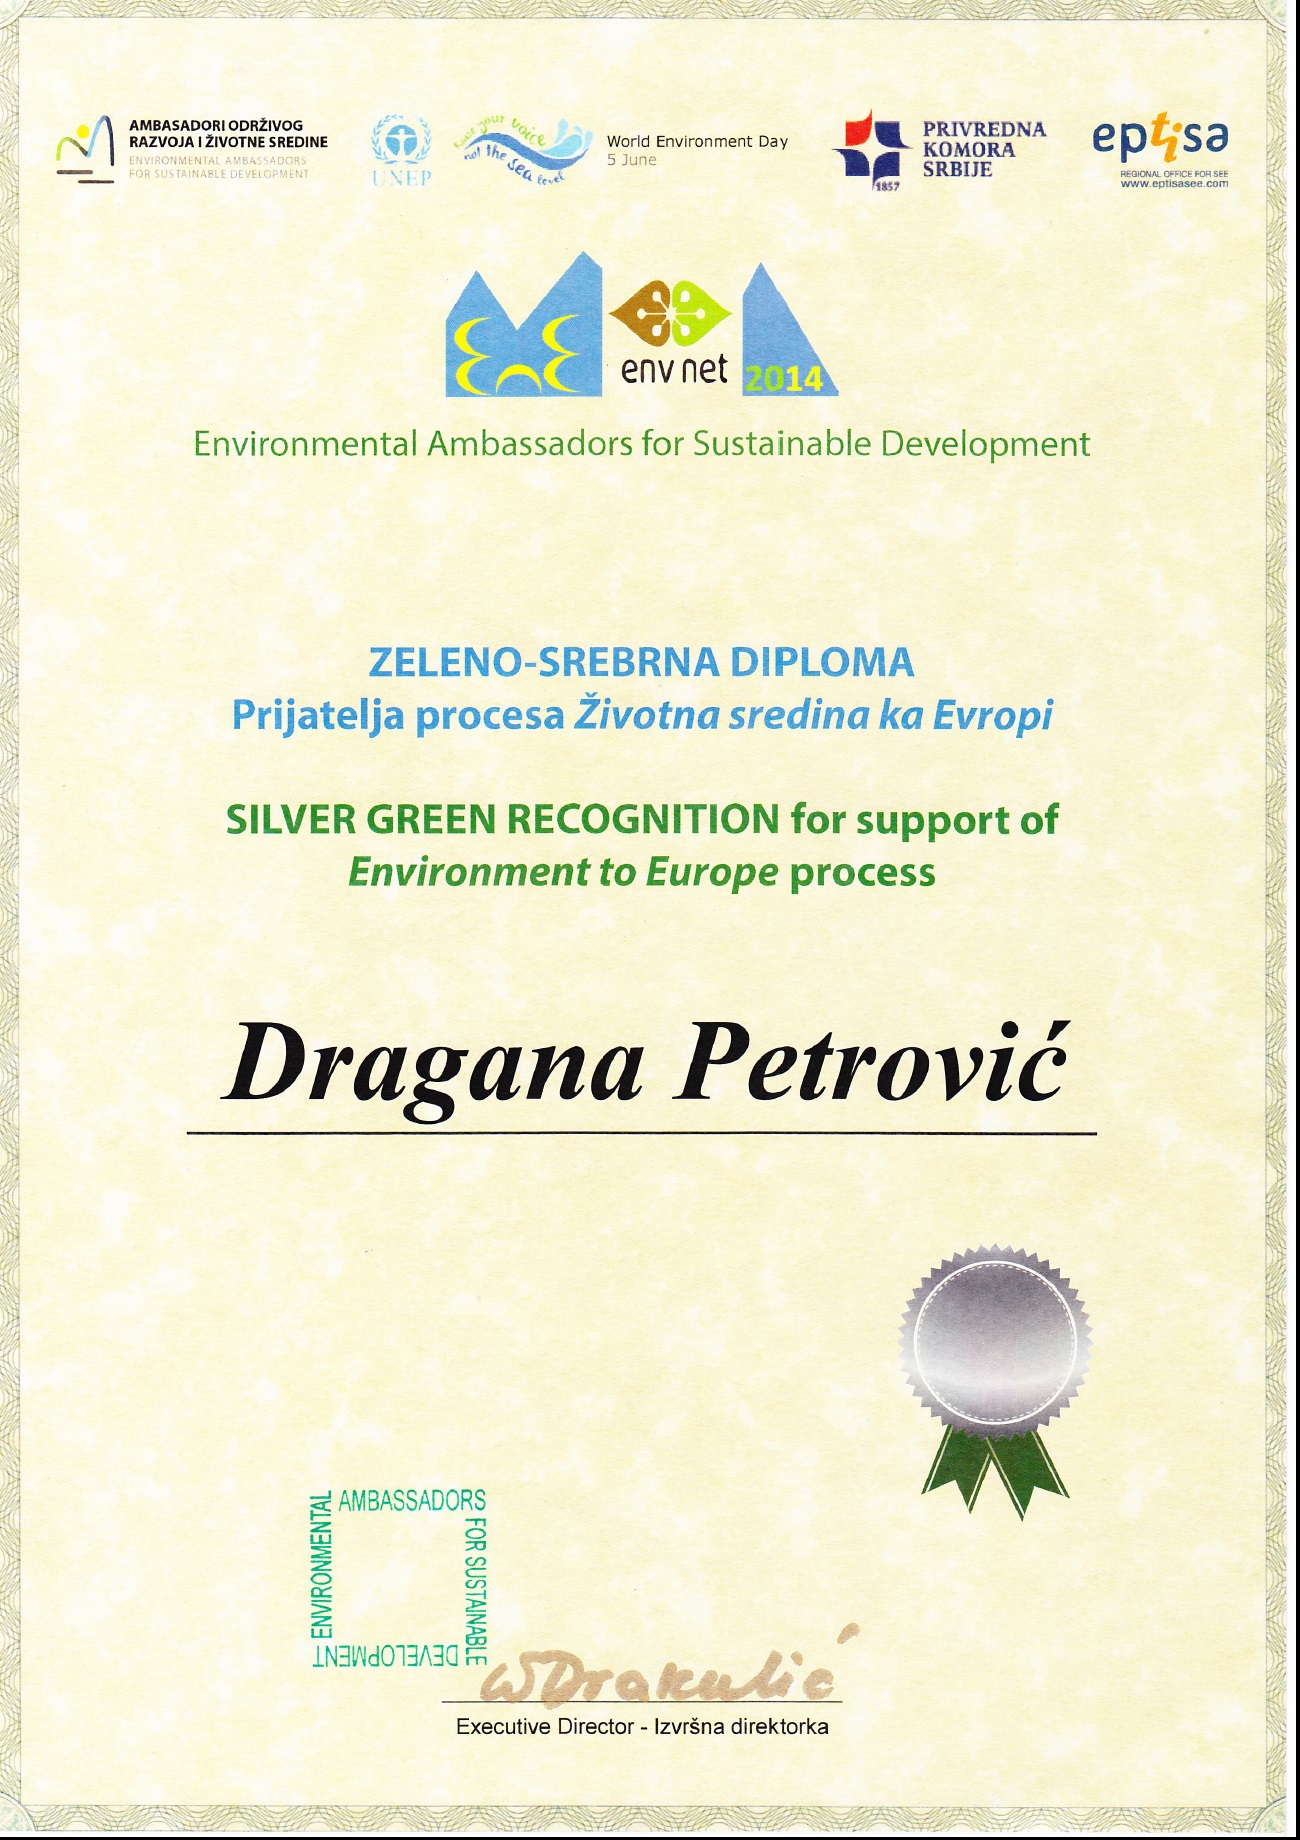 Dragana Petrovic Victoria consulting recognition